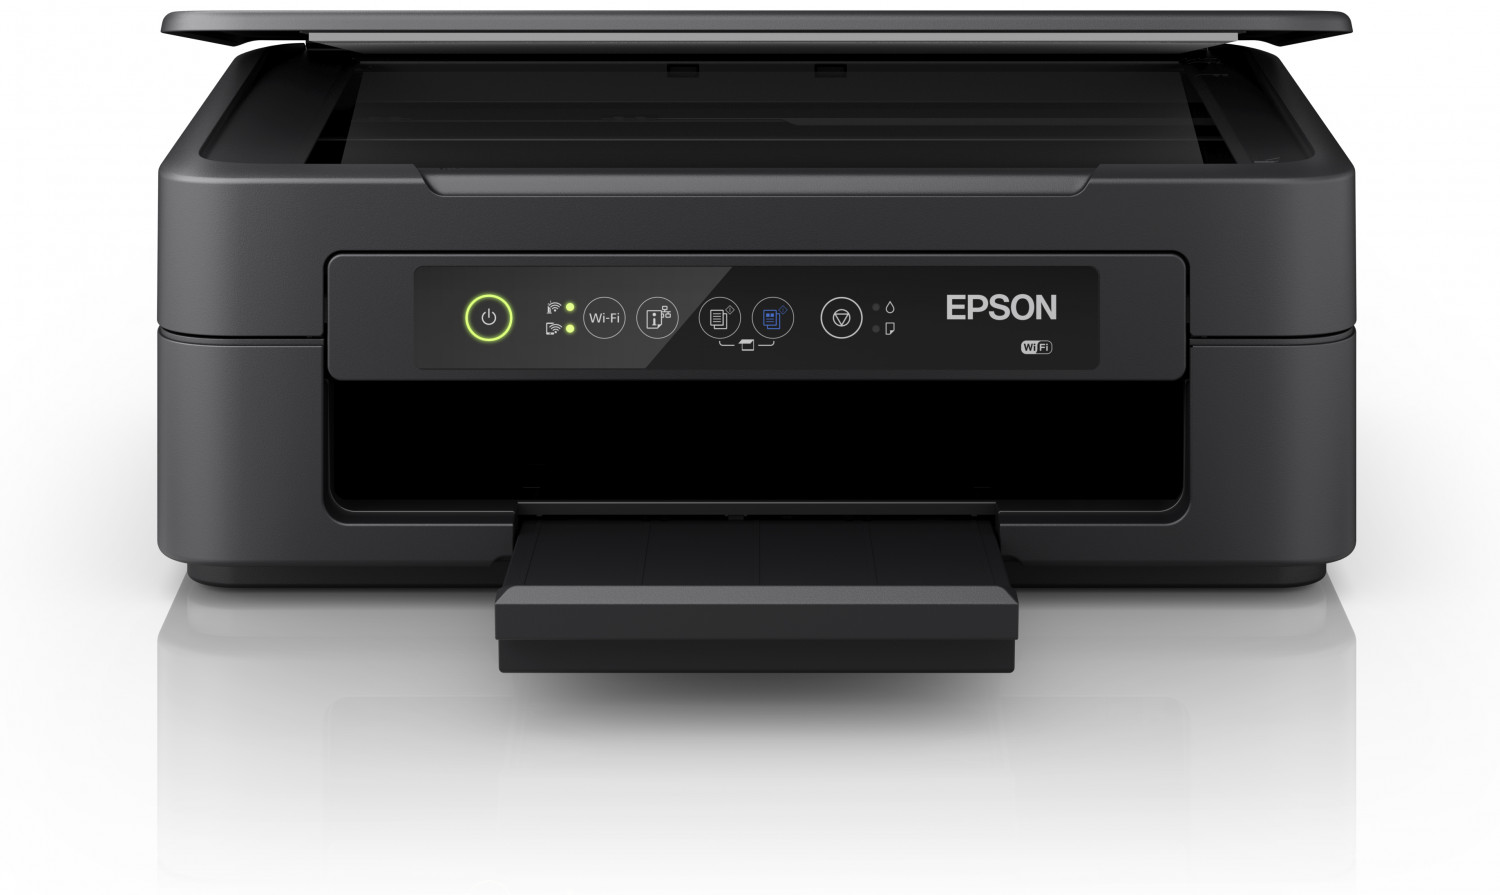 Step-by-step Driver Epson Printer XP-2100 Kali Linux Installation - Featured